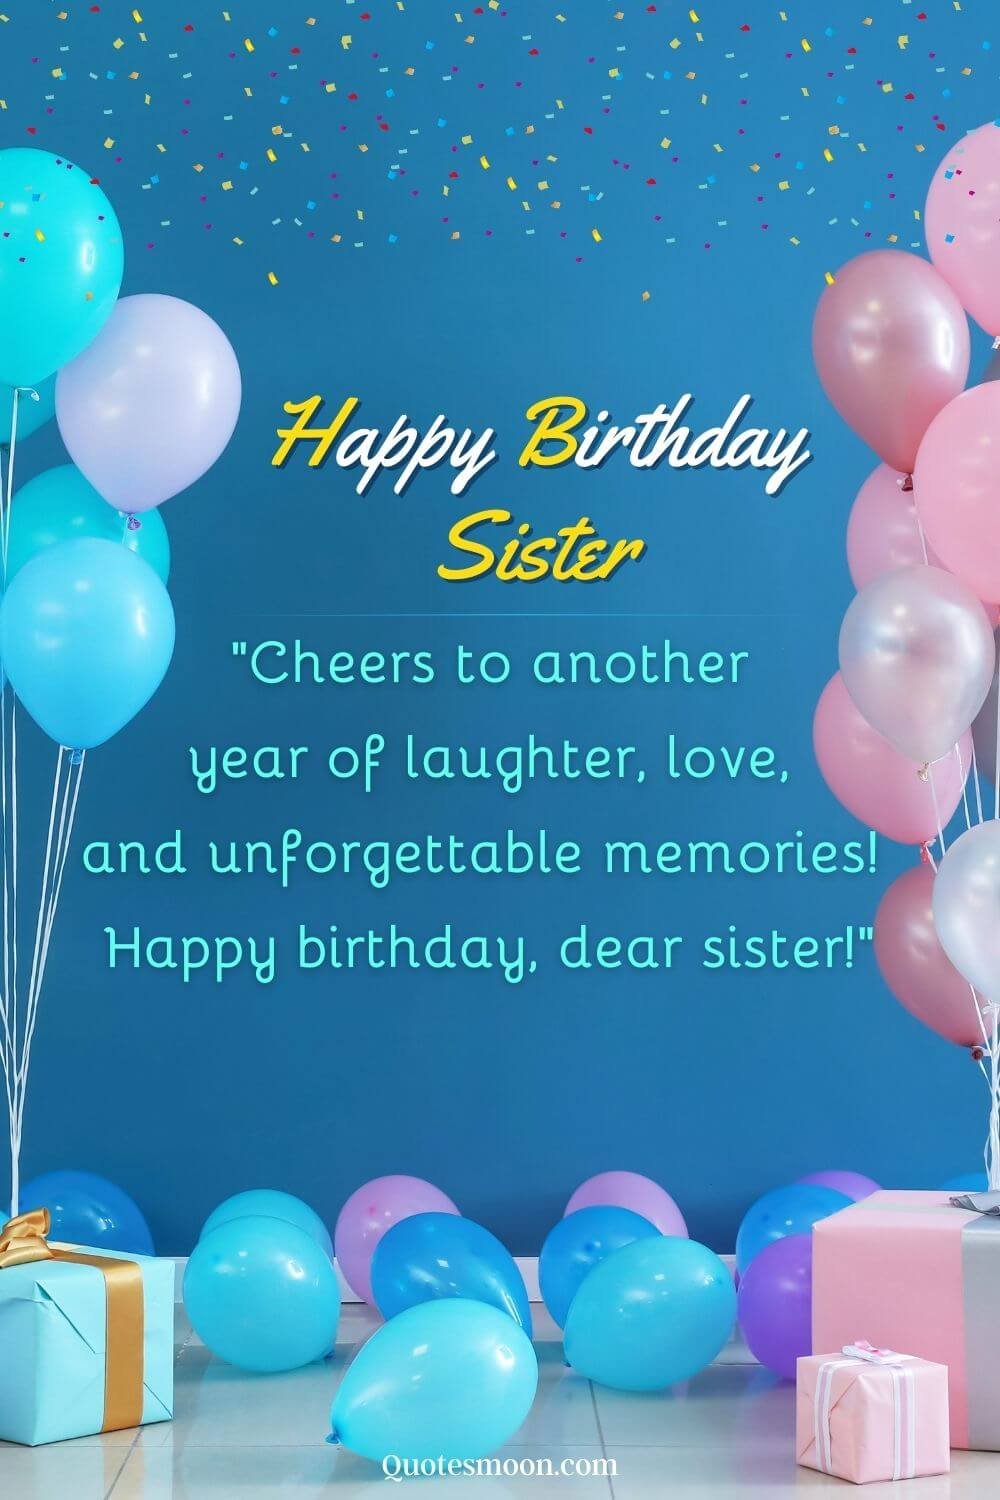 sister birthday balloons images wish latest